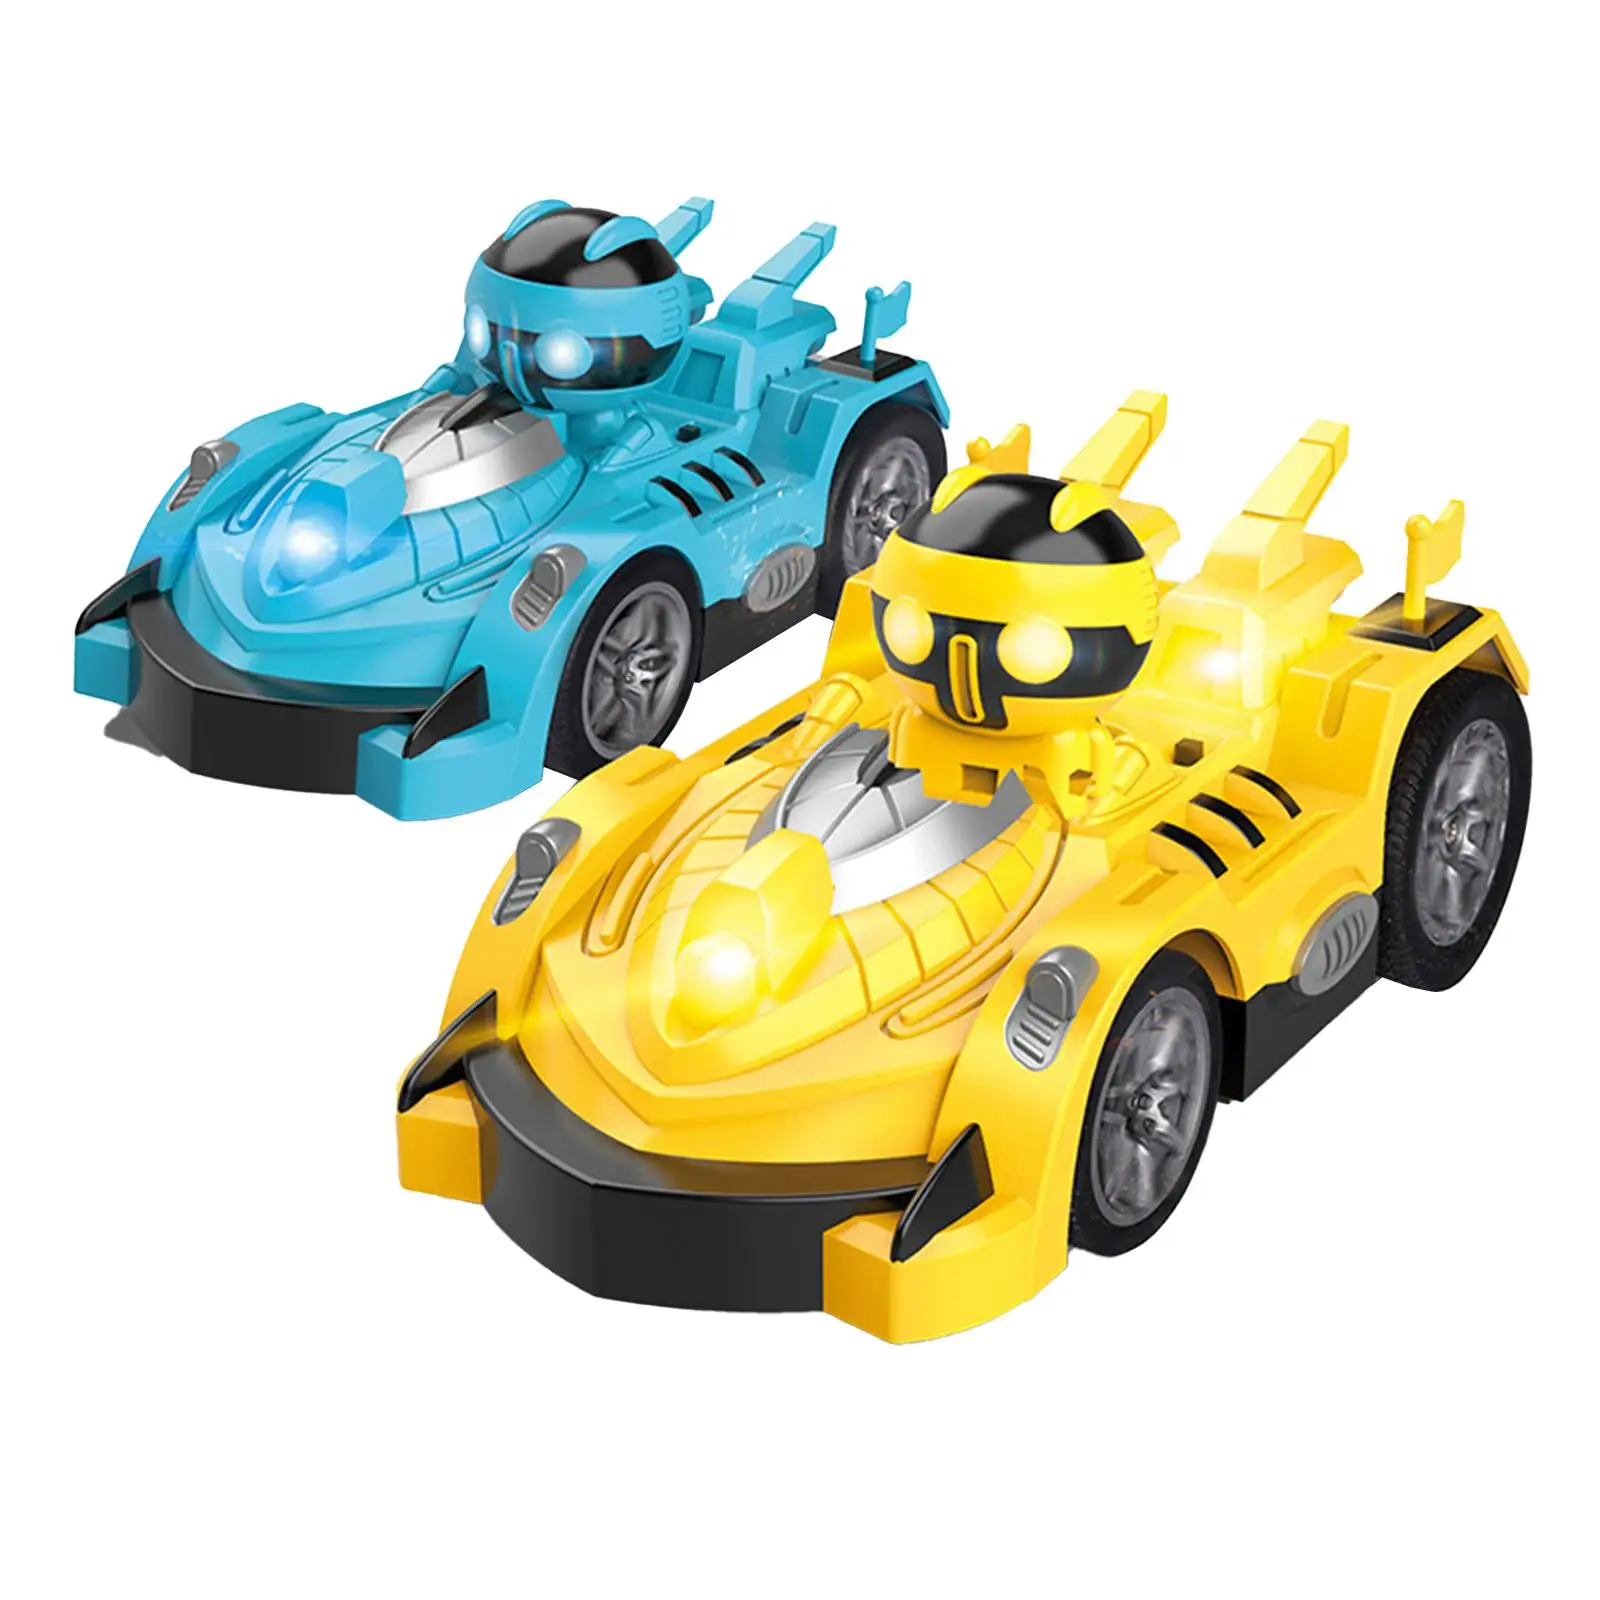 2Pcs Remote Control Toys Bumper Car Crash Bounce Ejection Light Party Favor Durable High Speed for Adults Teens Children Holiday